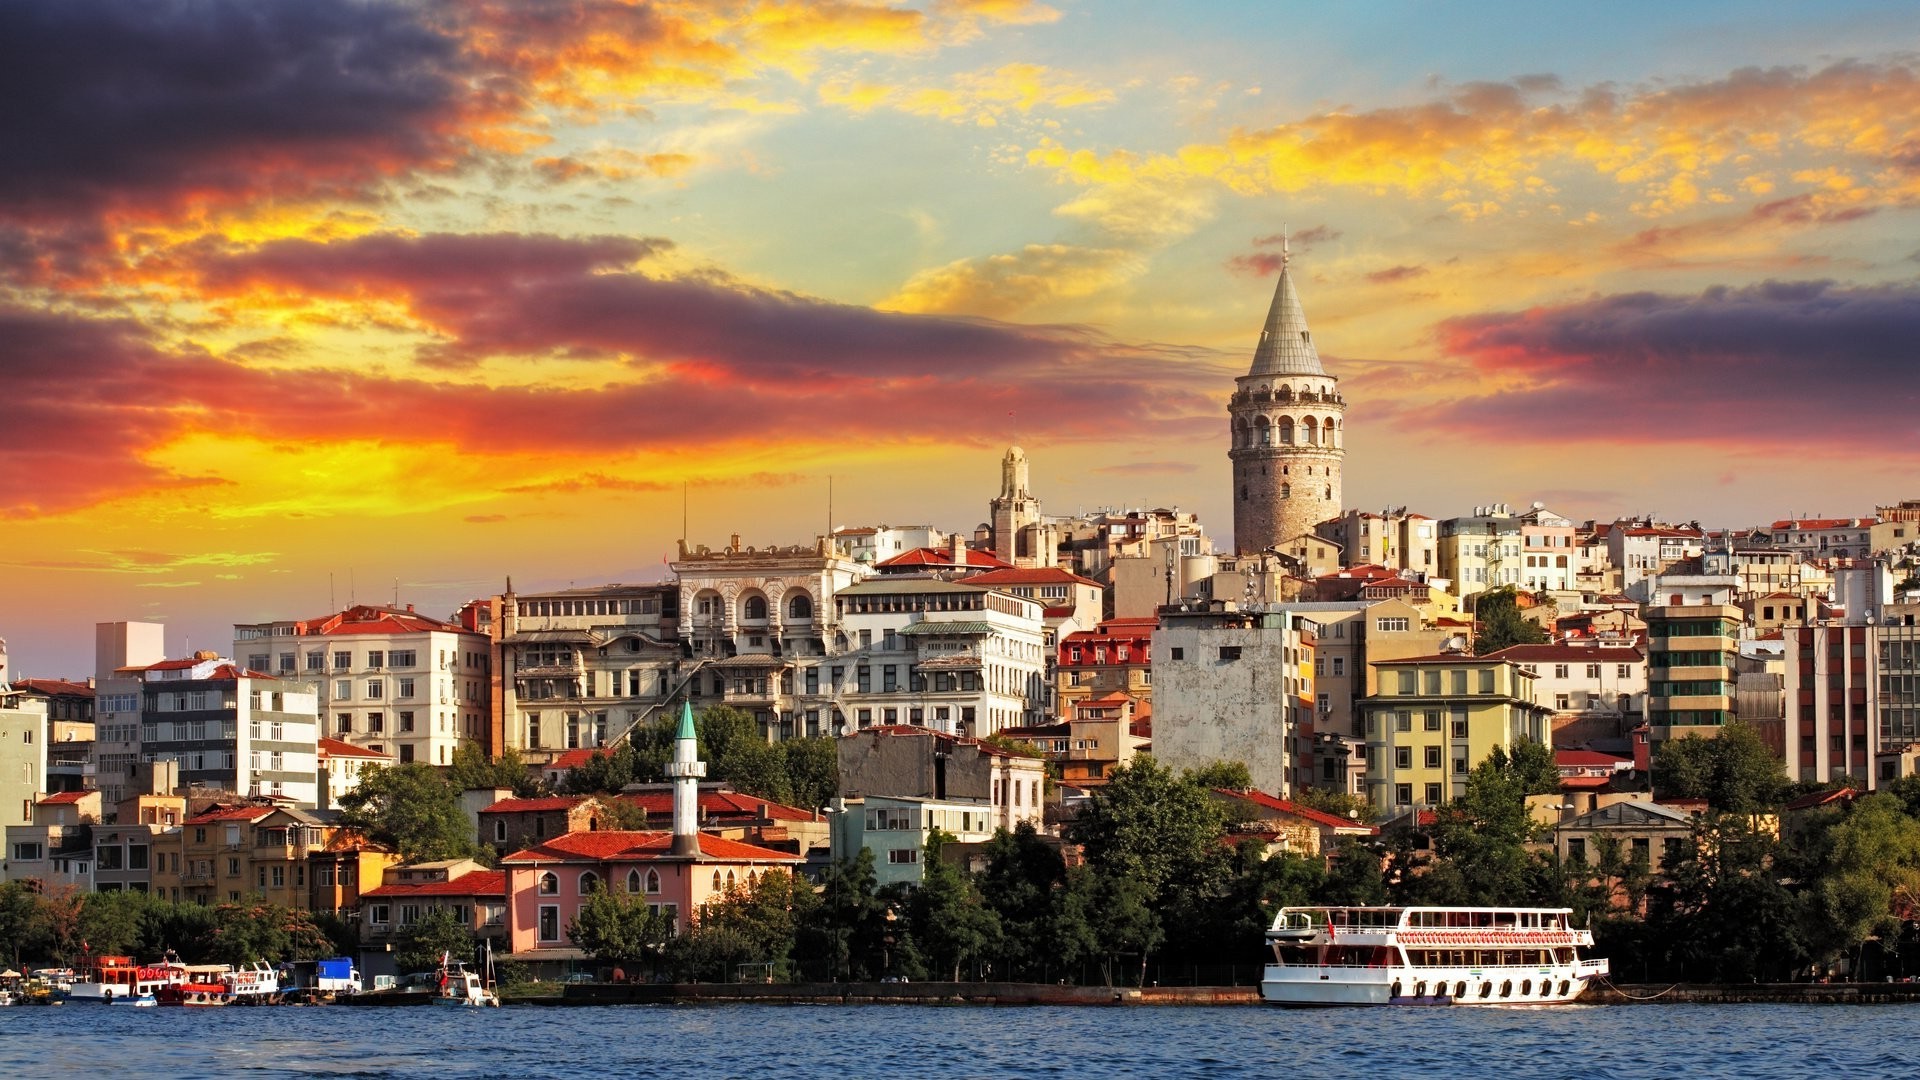 architecture, Cityscape, Istanbul, Turkey, Building, Tower, Ship, Sunset, Clouds, Old building, Trees, Water, Galata Kulesi, Galata Wallpaper